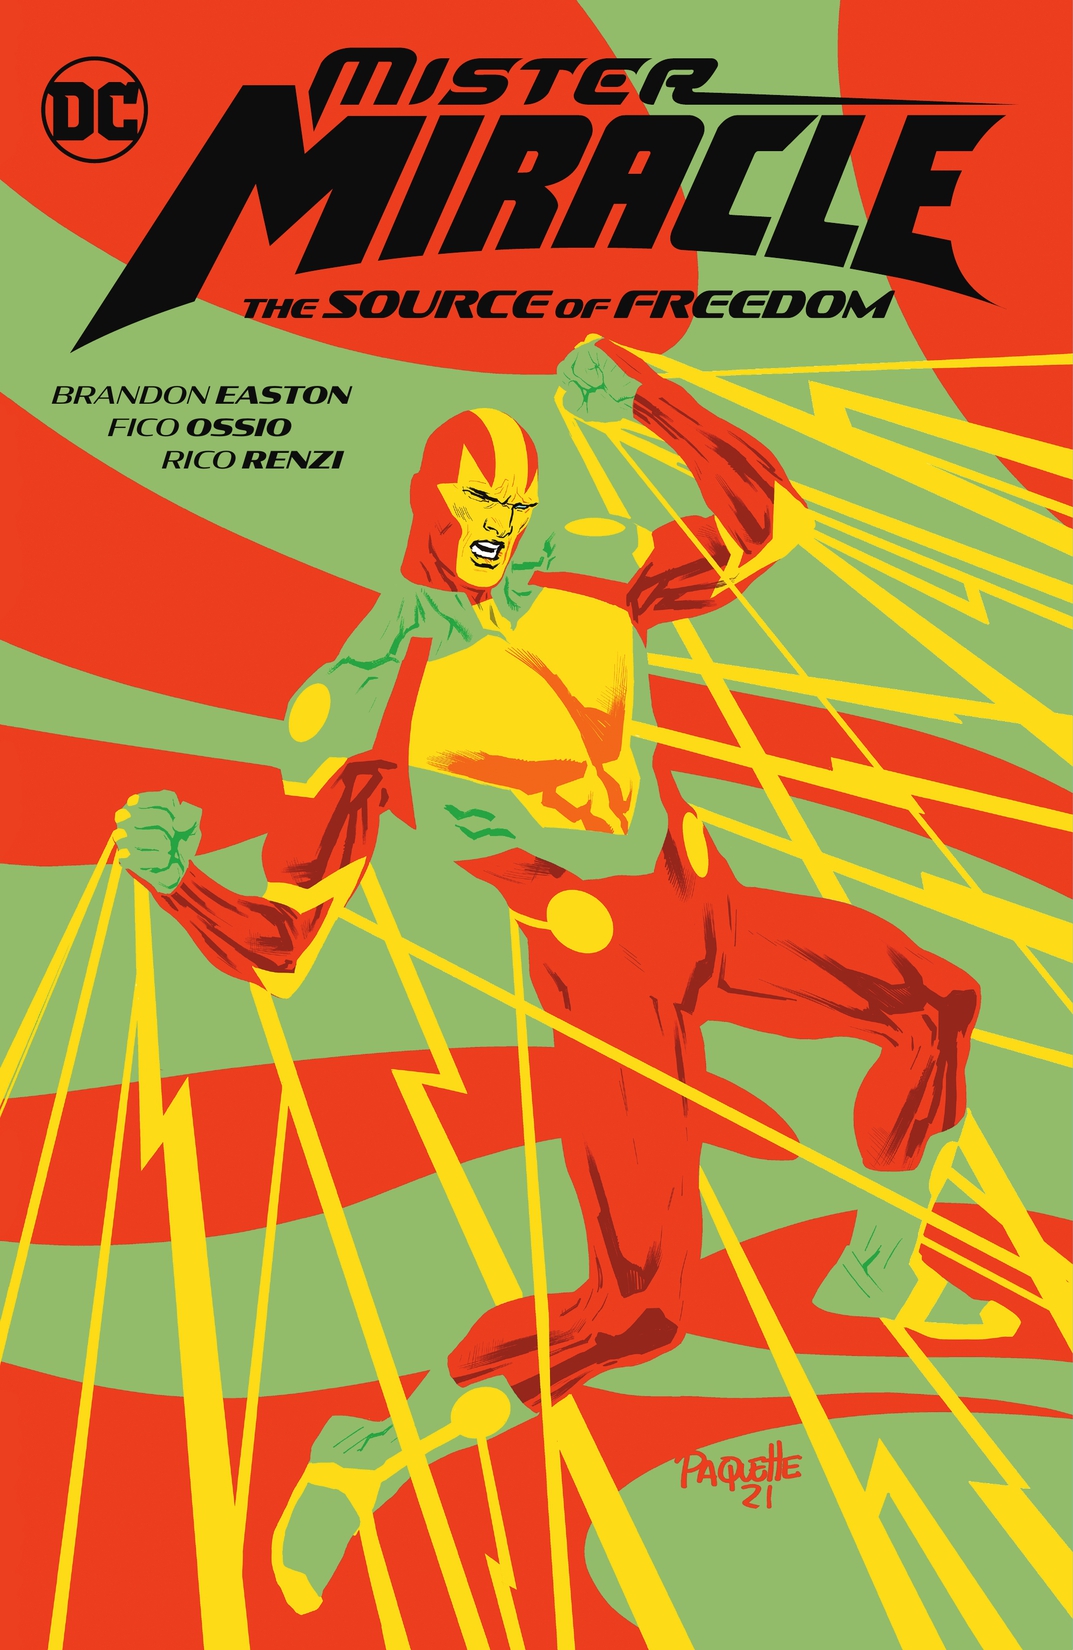 Mister Miracle: The Source of Freedom preview images